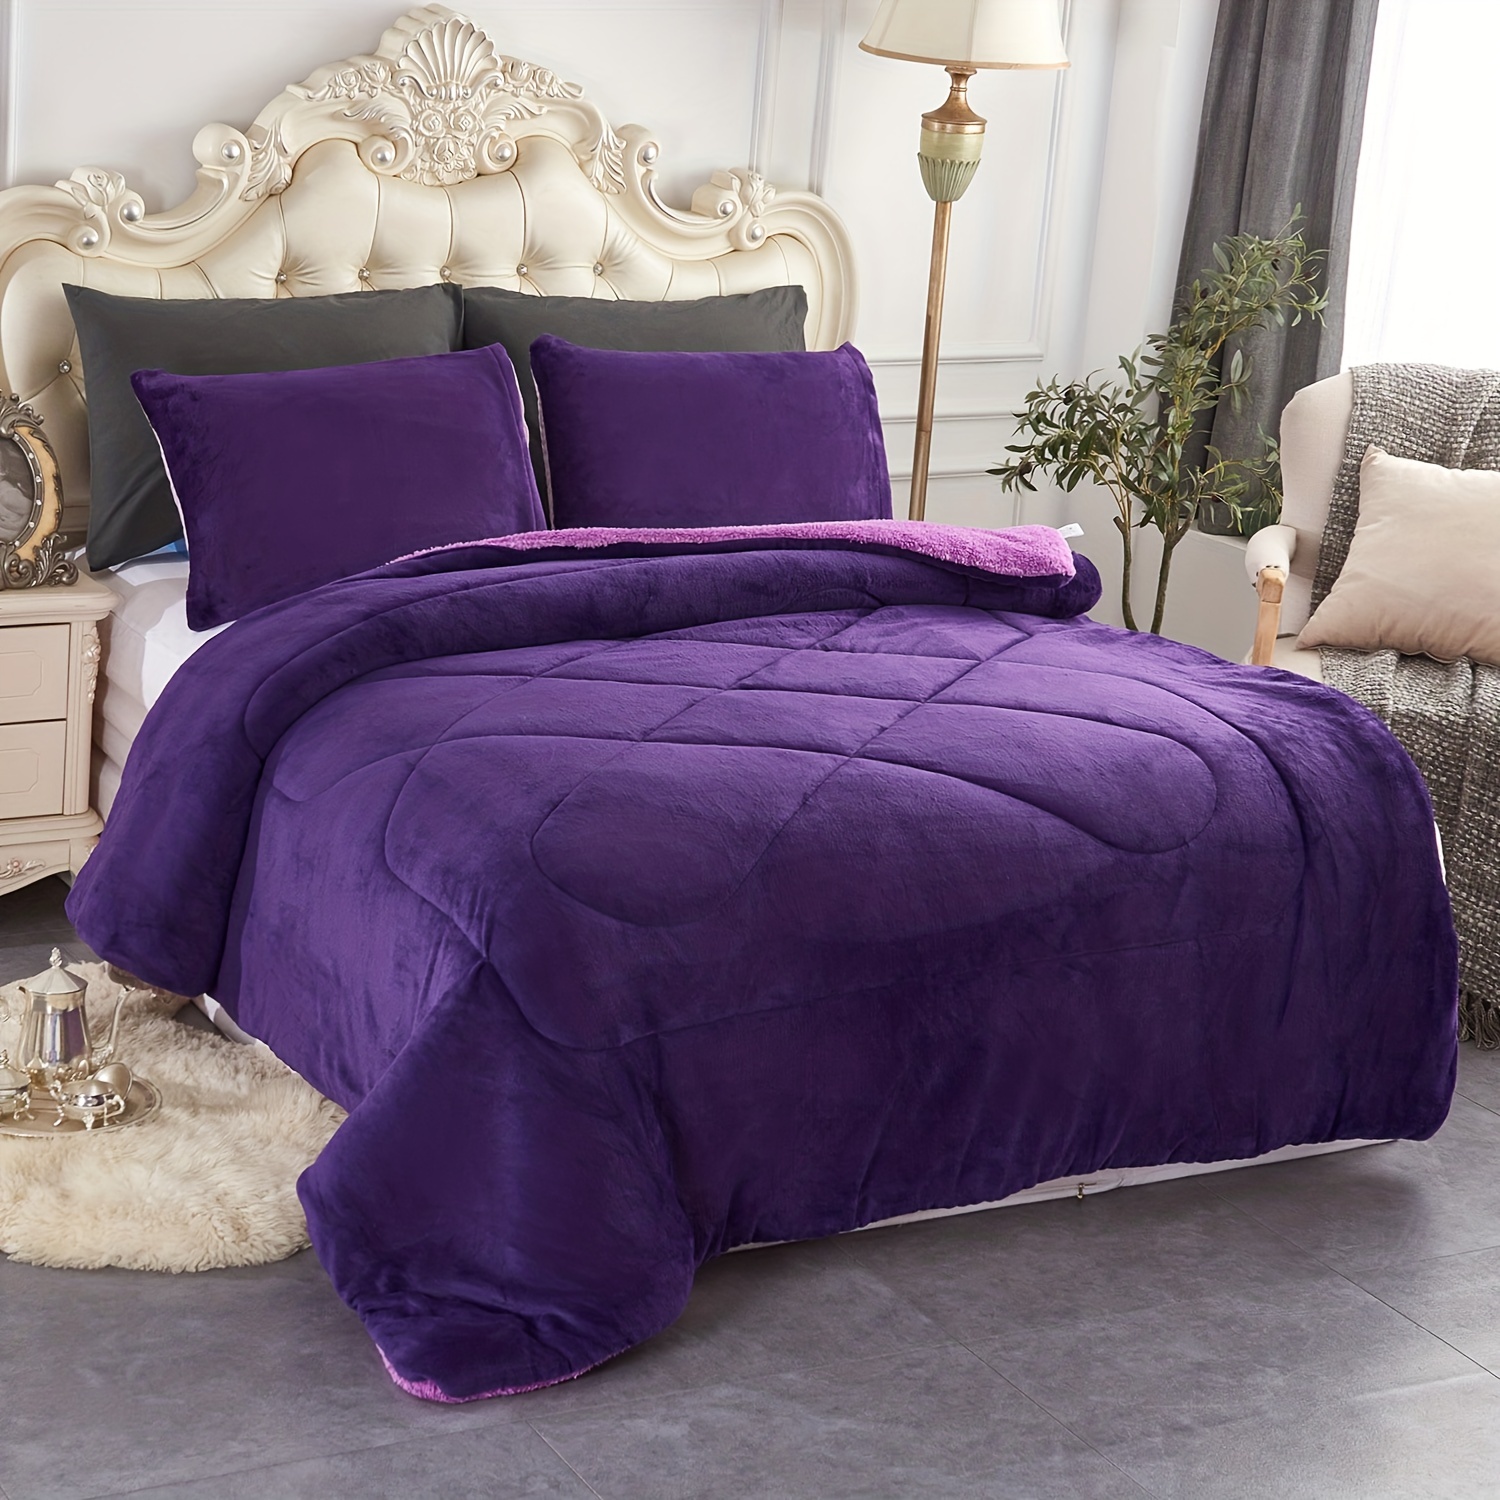 Buy Homesmart Purple 3 Layer Quilted Microfiber Flannel and Sherpa  Reversible Comforter and Set of 2 Shams, Microfiber Comforter, Best  Comforter Sets, Bed Comforters, Comforter Set for Bedroom at ShopLC.